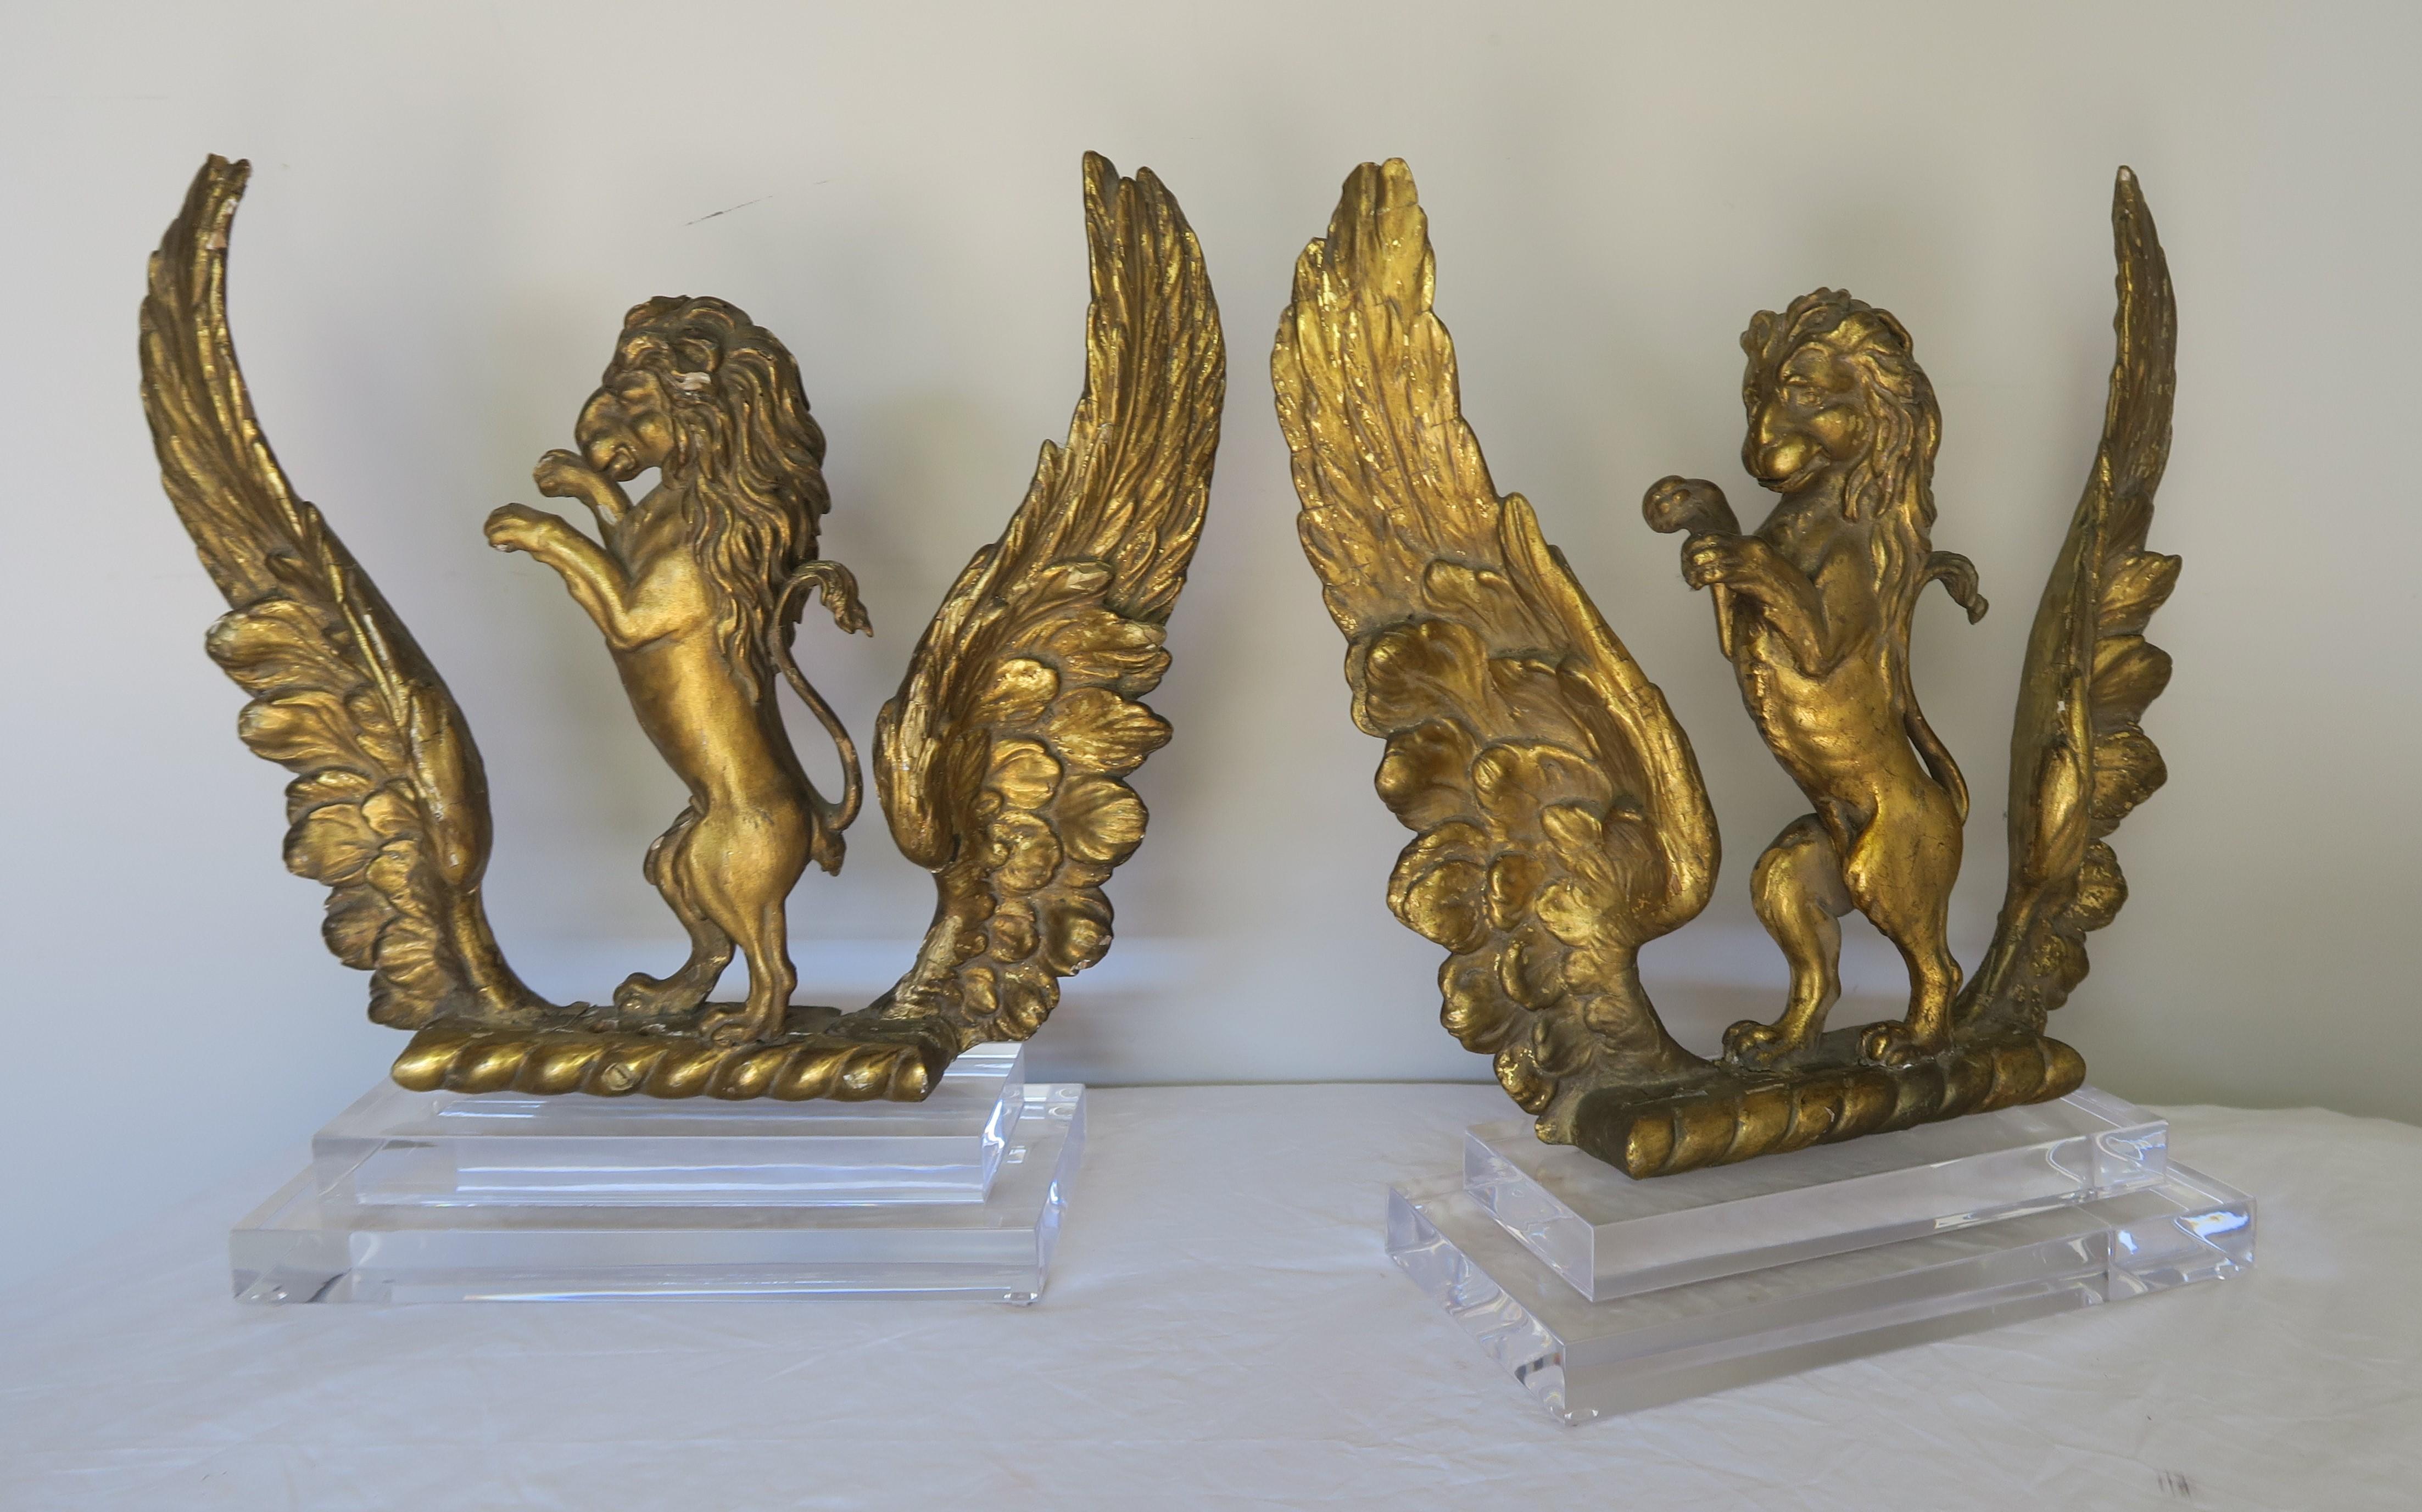 Pair of 19th Century Italian Giltwood Lions on Lucite Bases (Barock)